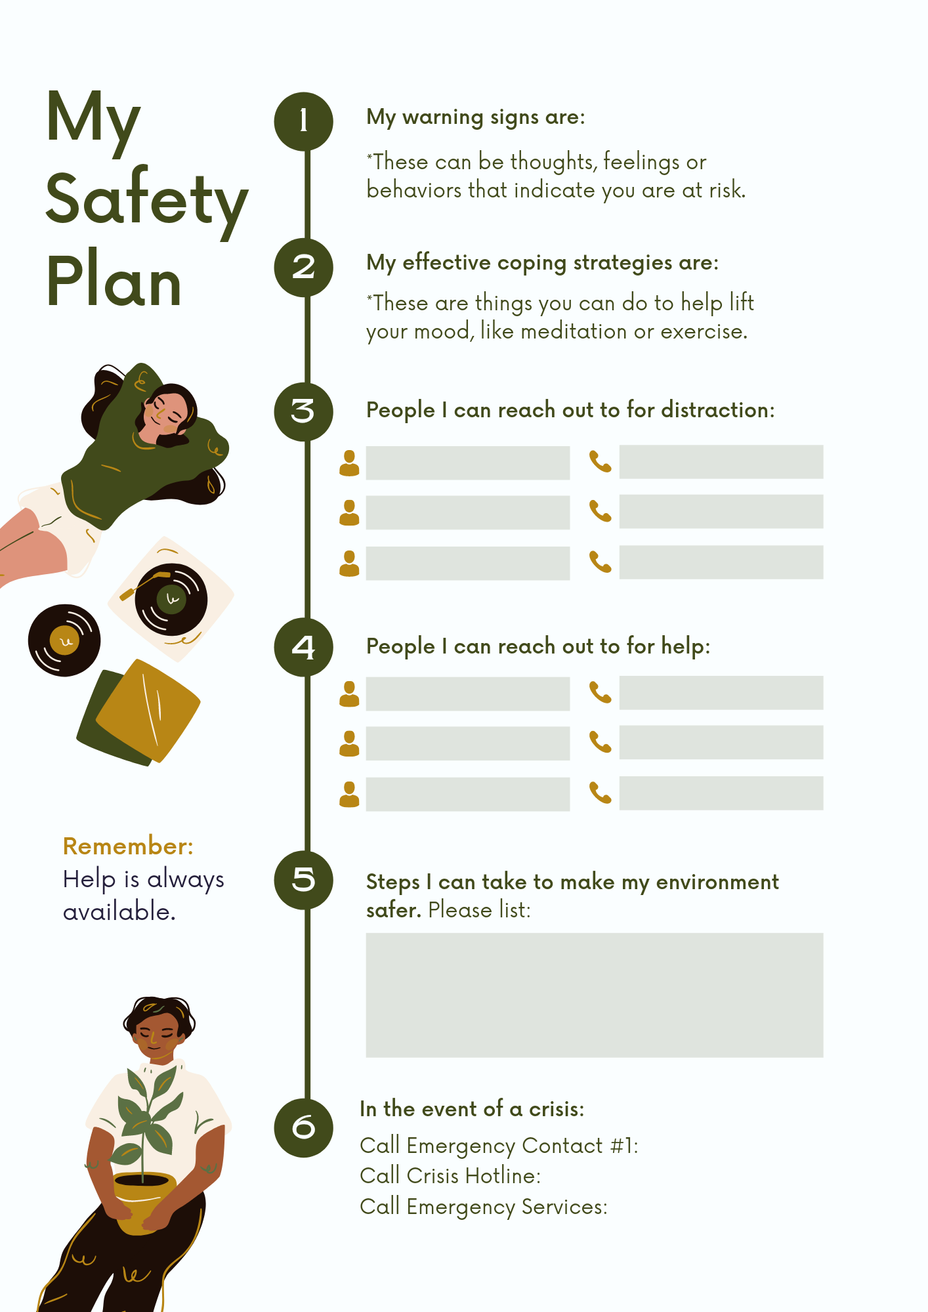 <p>Let's Talk About Safety Plans</p>